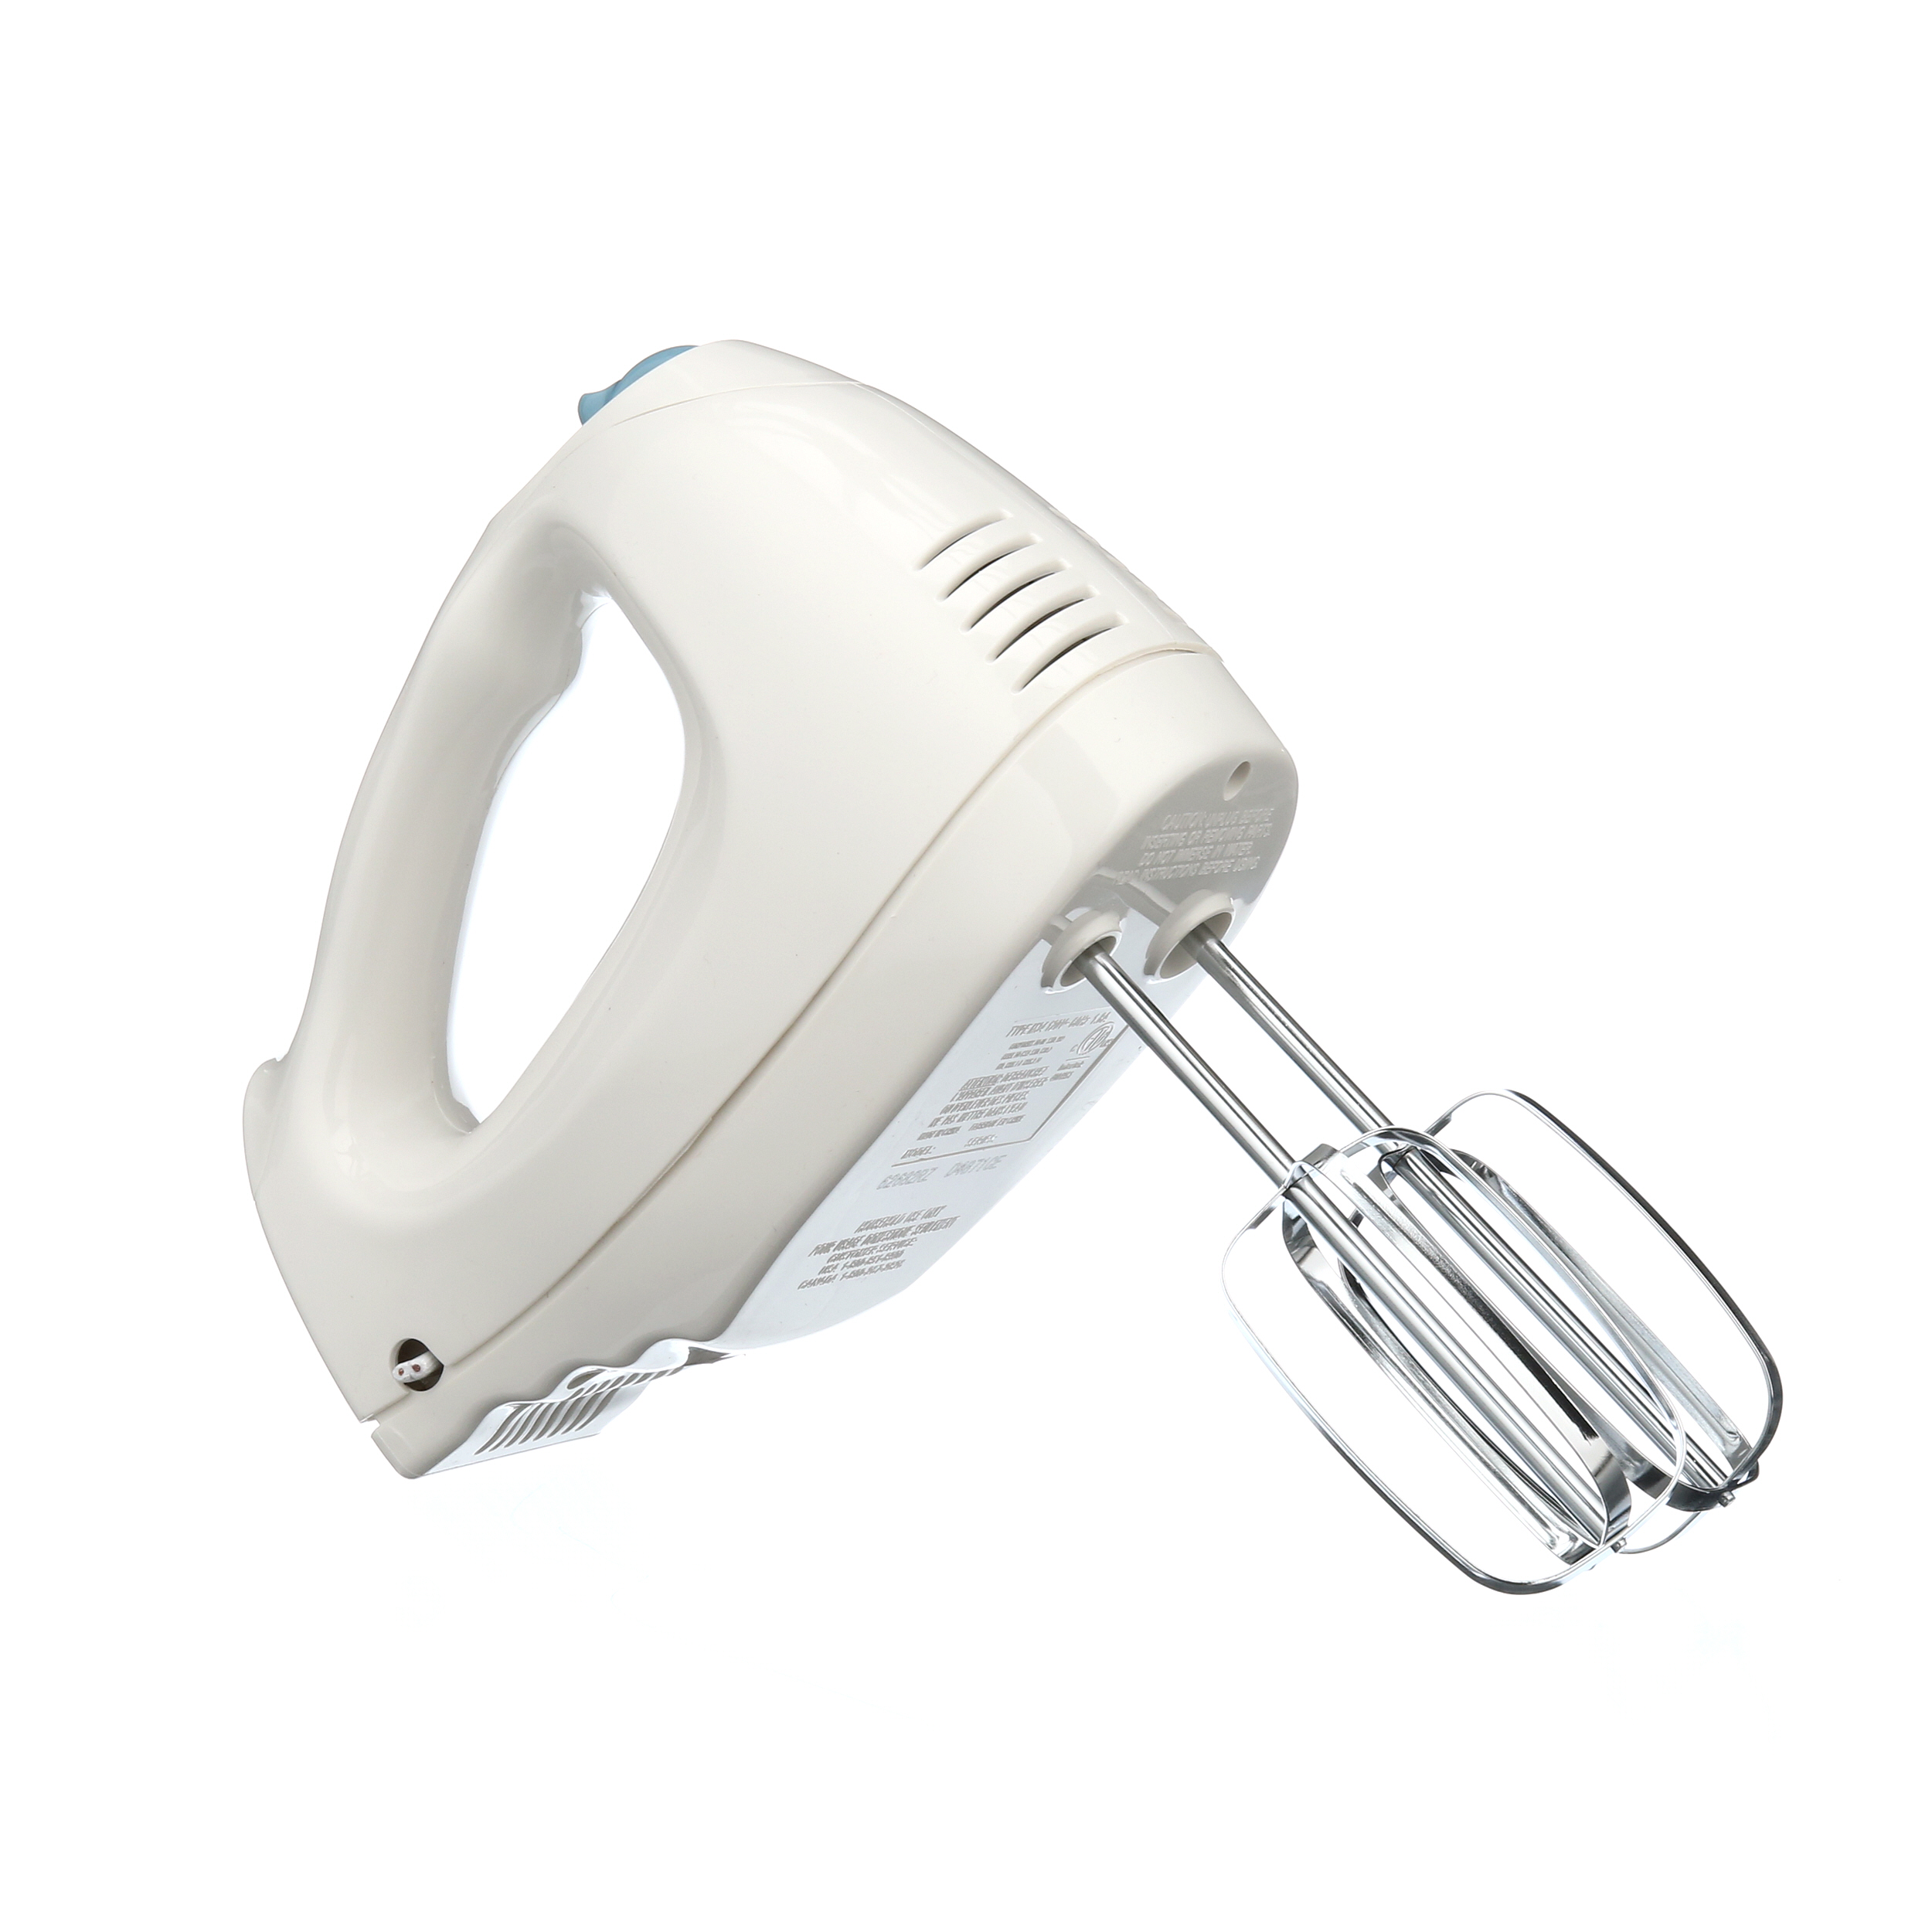 Hamilton Beach 6 Speed Electric Hand Mixer with Whisk, Traditional Beaters,  Snap-On Case, 250 Watts, White, 62682